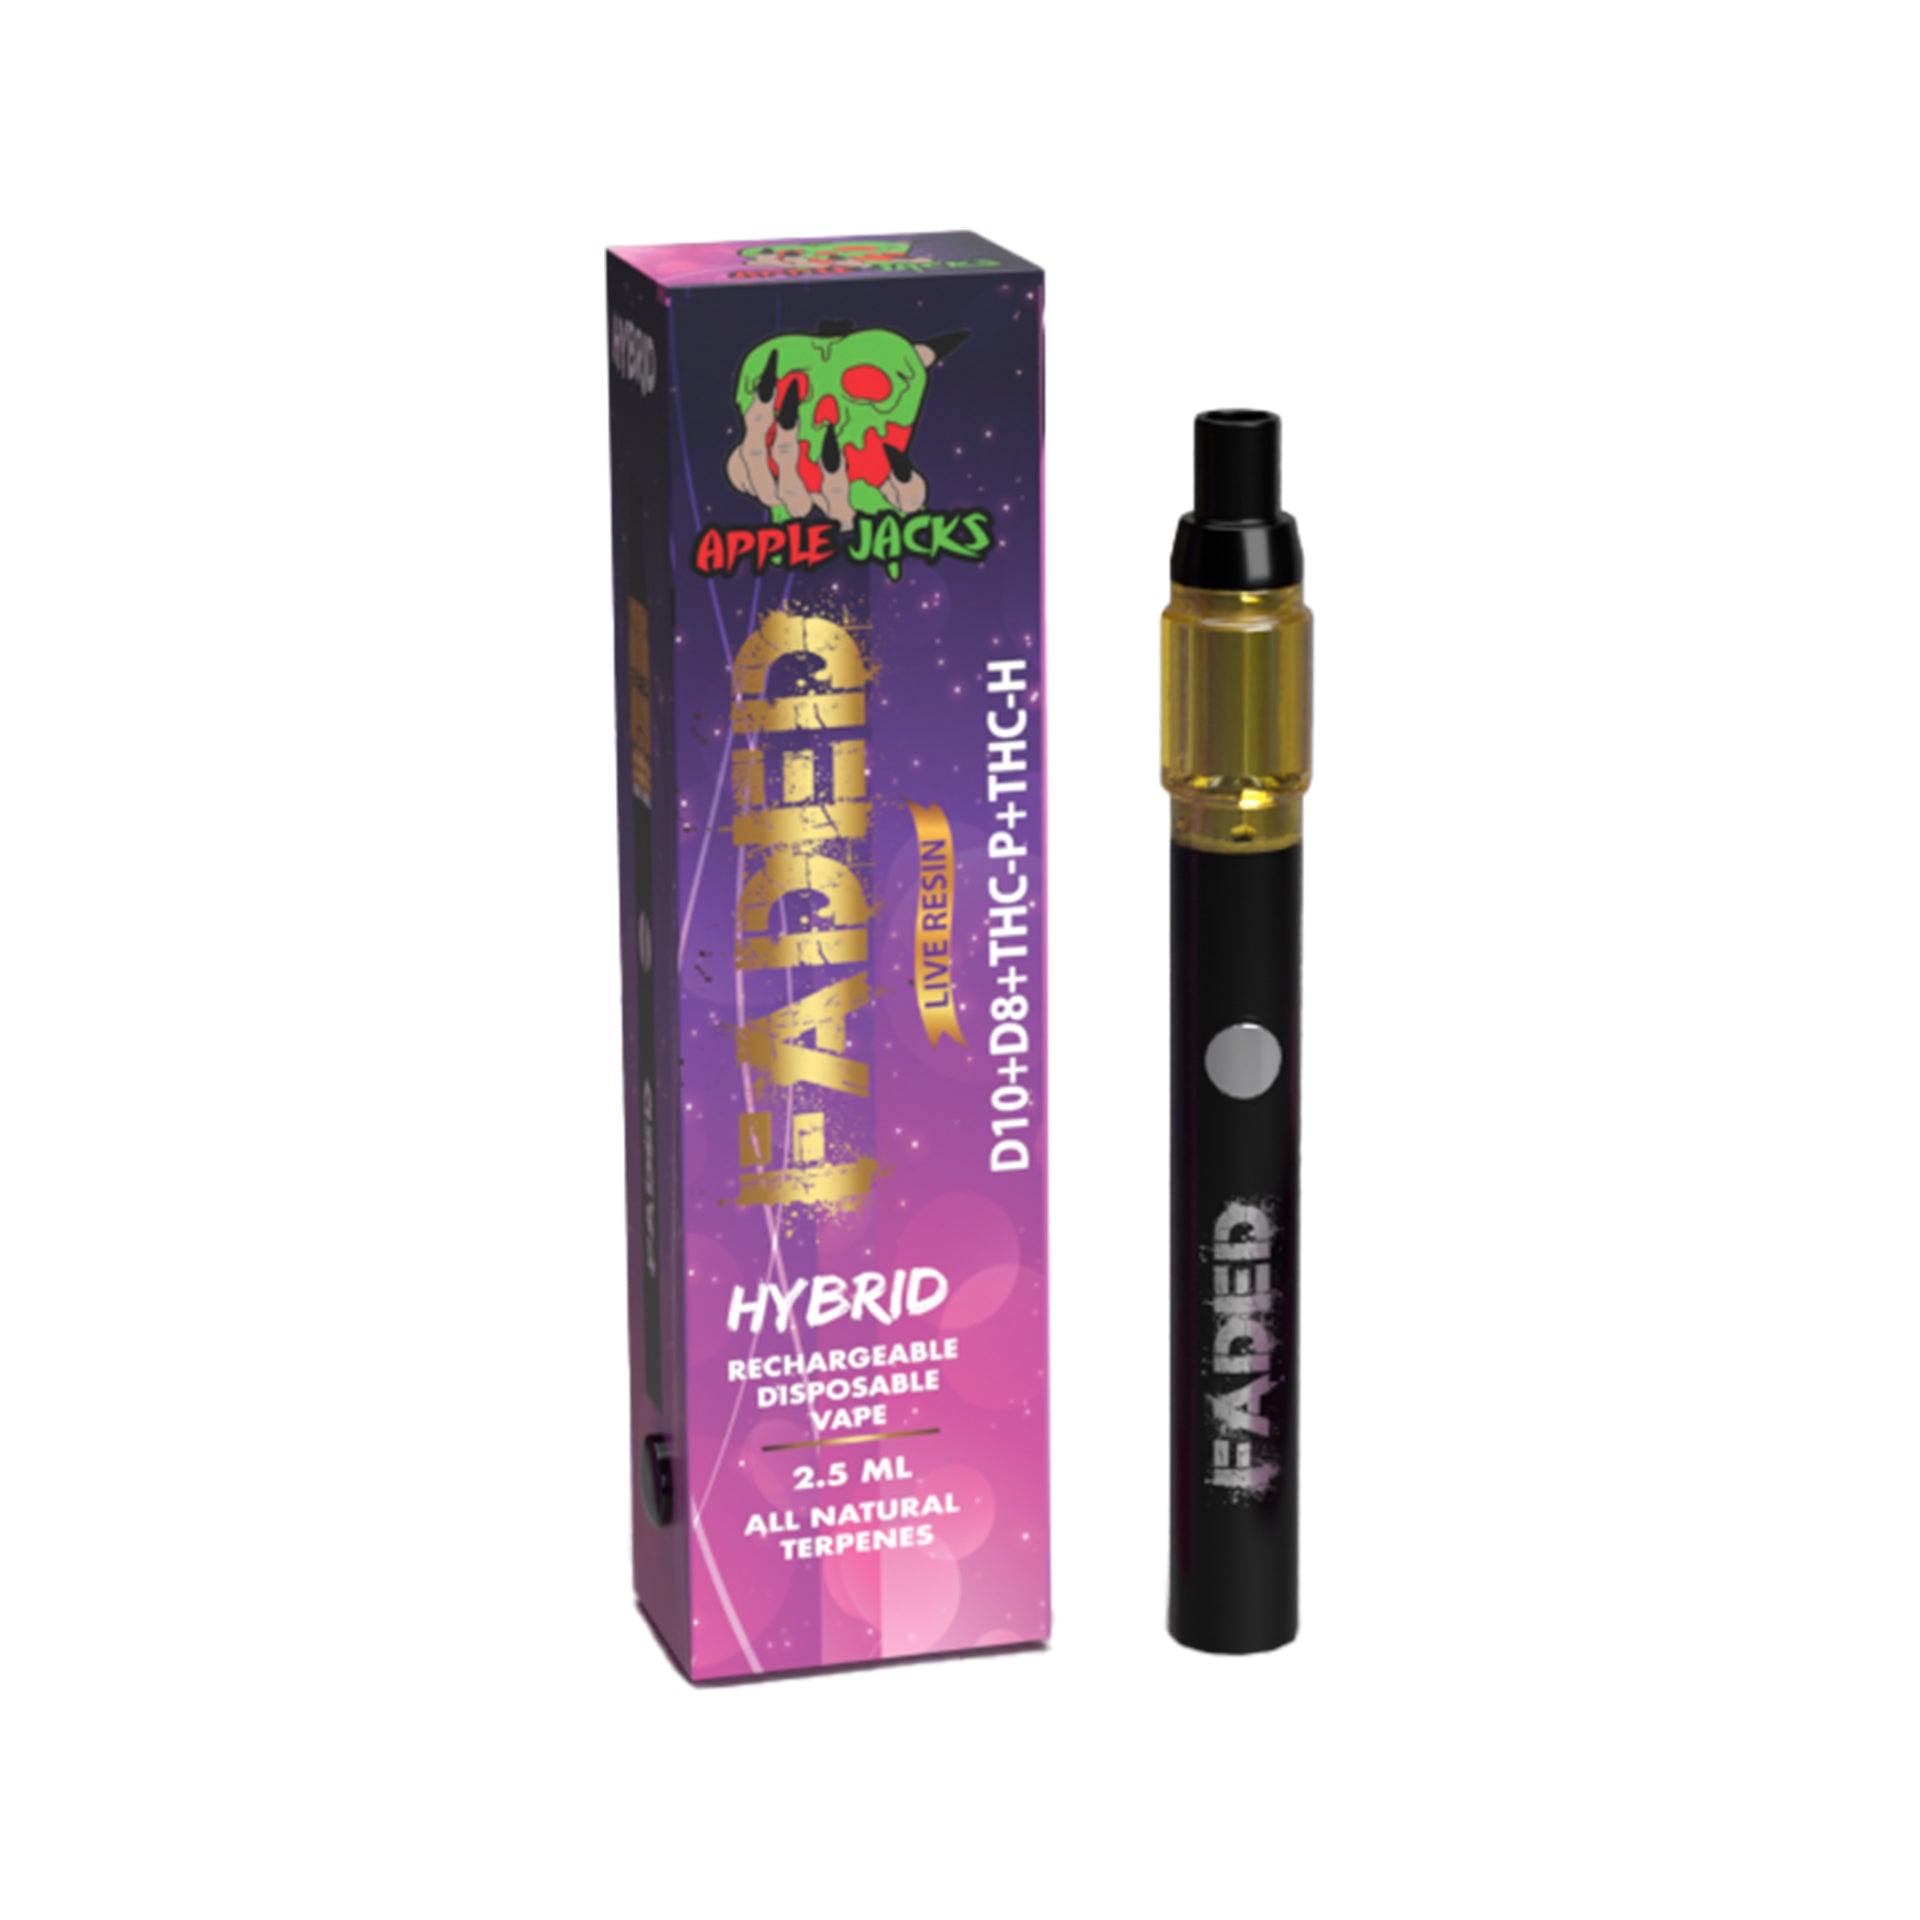 FADED D-10+D-8+THC-P+THC-H LIVE RESIN RECHARGEABLE DISPOSABLE - HYBRID APPLE JACKS 2.5ML